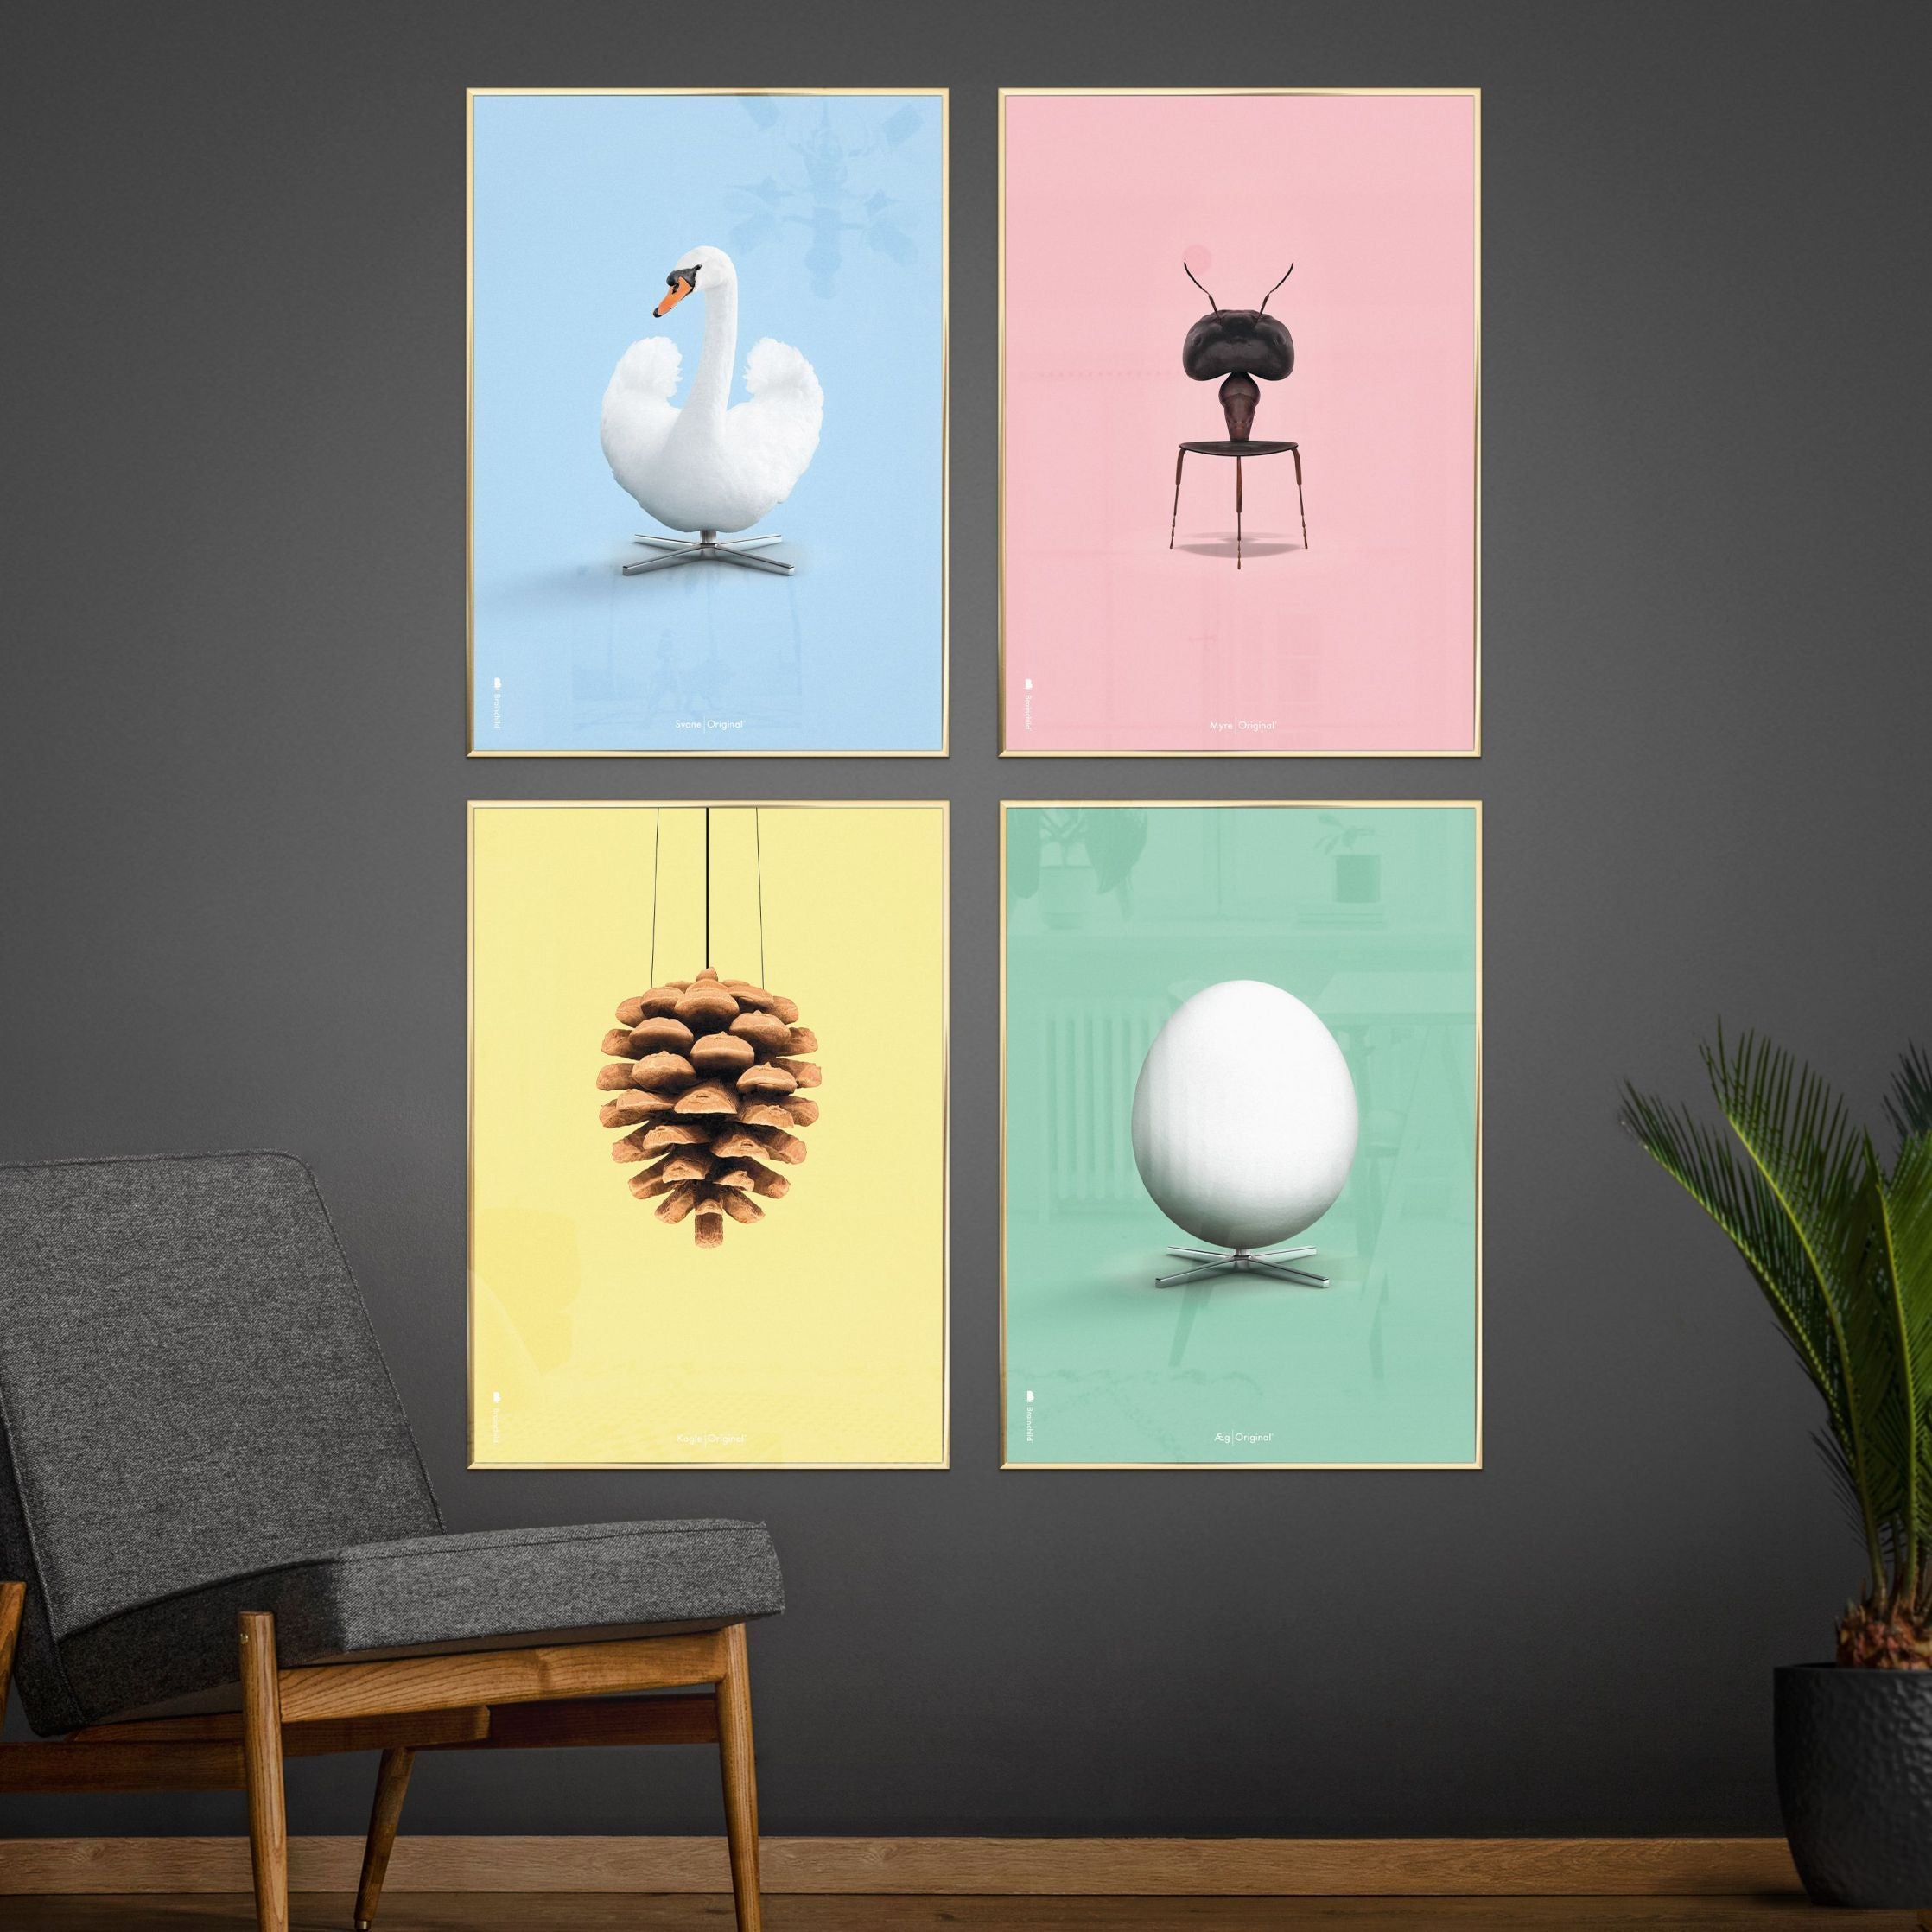 Brainchild Swan Classic Poster Without Frame 50x70 Cm, Light Blue Background